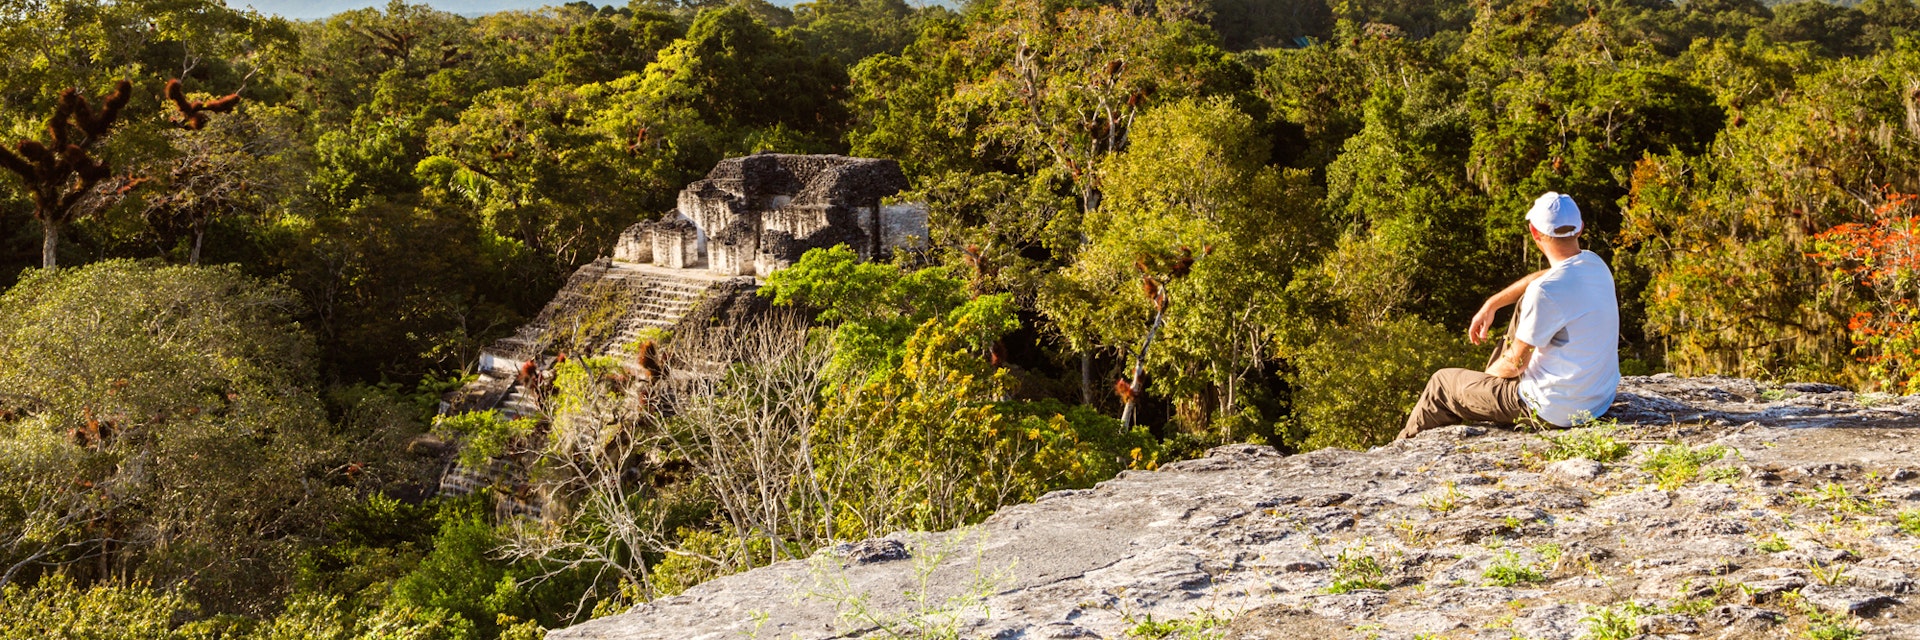 Tourist looking at old mayan ruins from high lookout (Temple IV and temple of the Lost World), Tikal National Park, Peten, Guatemala